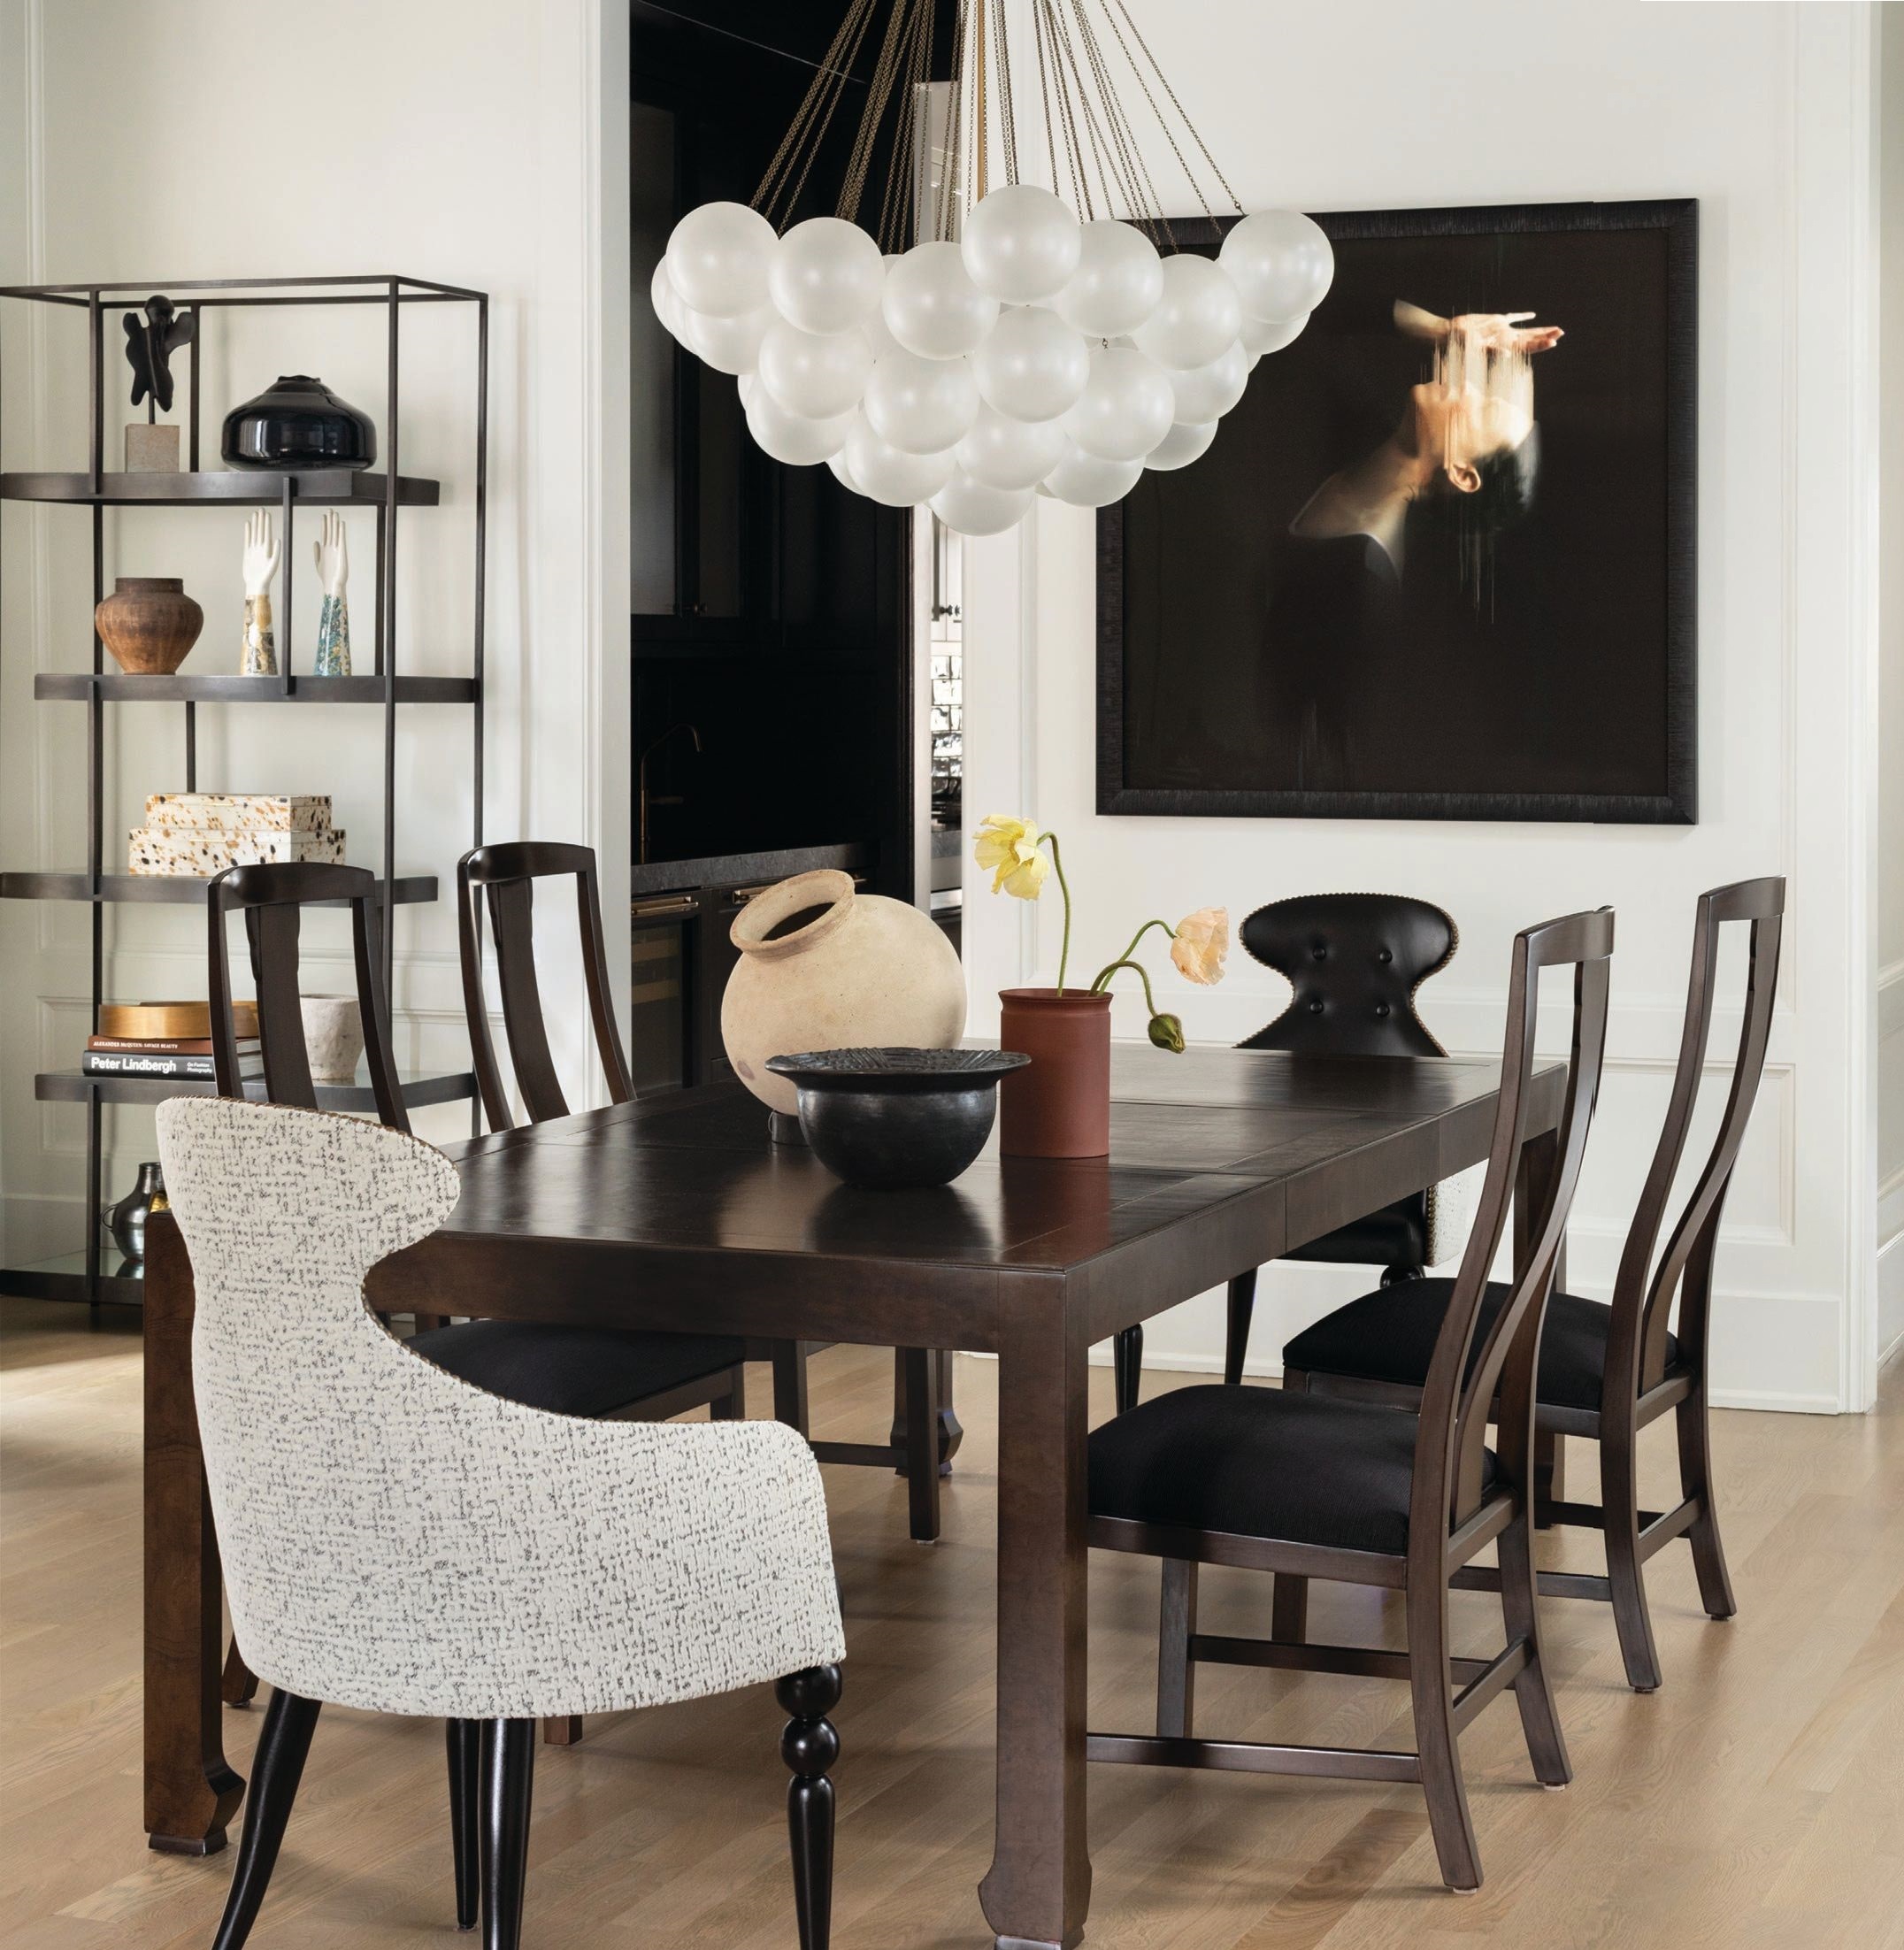 Apparatus Studio’s Cloud chandelier adds an ethereal touch to the dining room. Photographed by Aimée Mazzenga